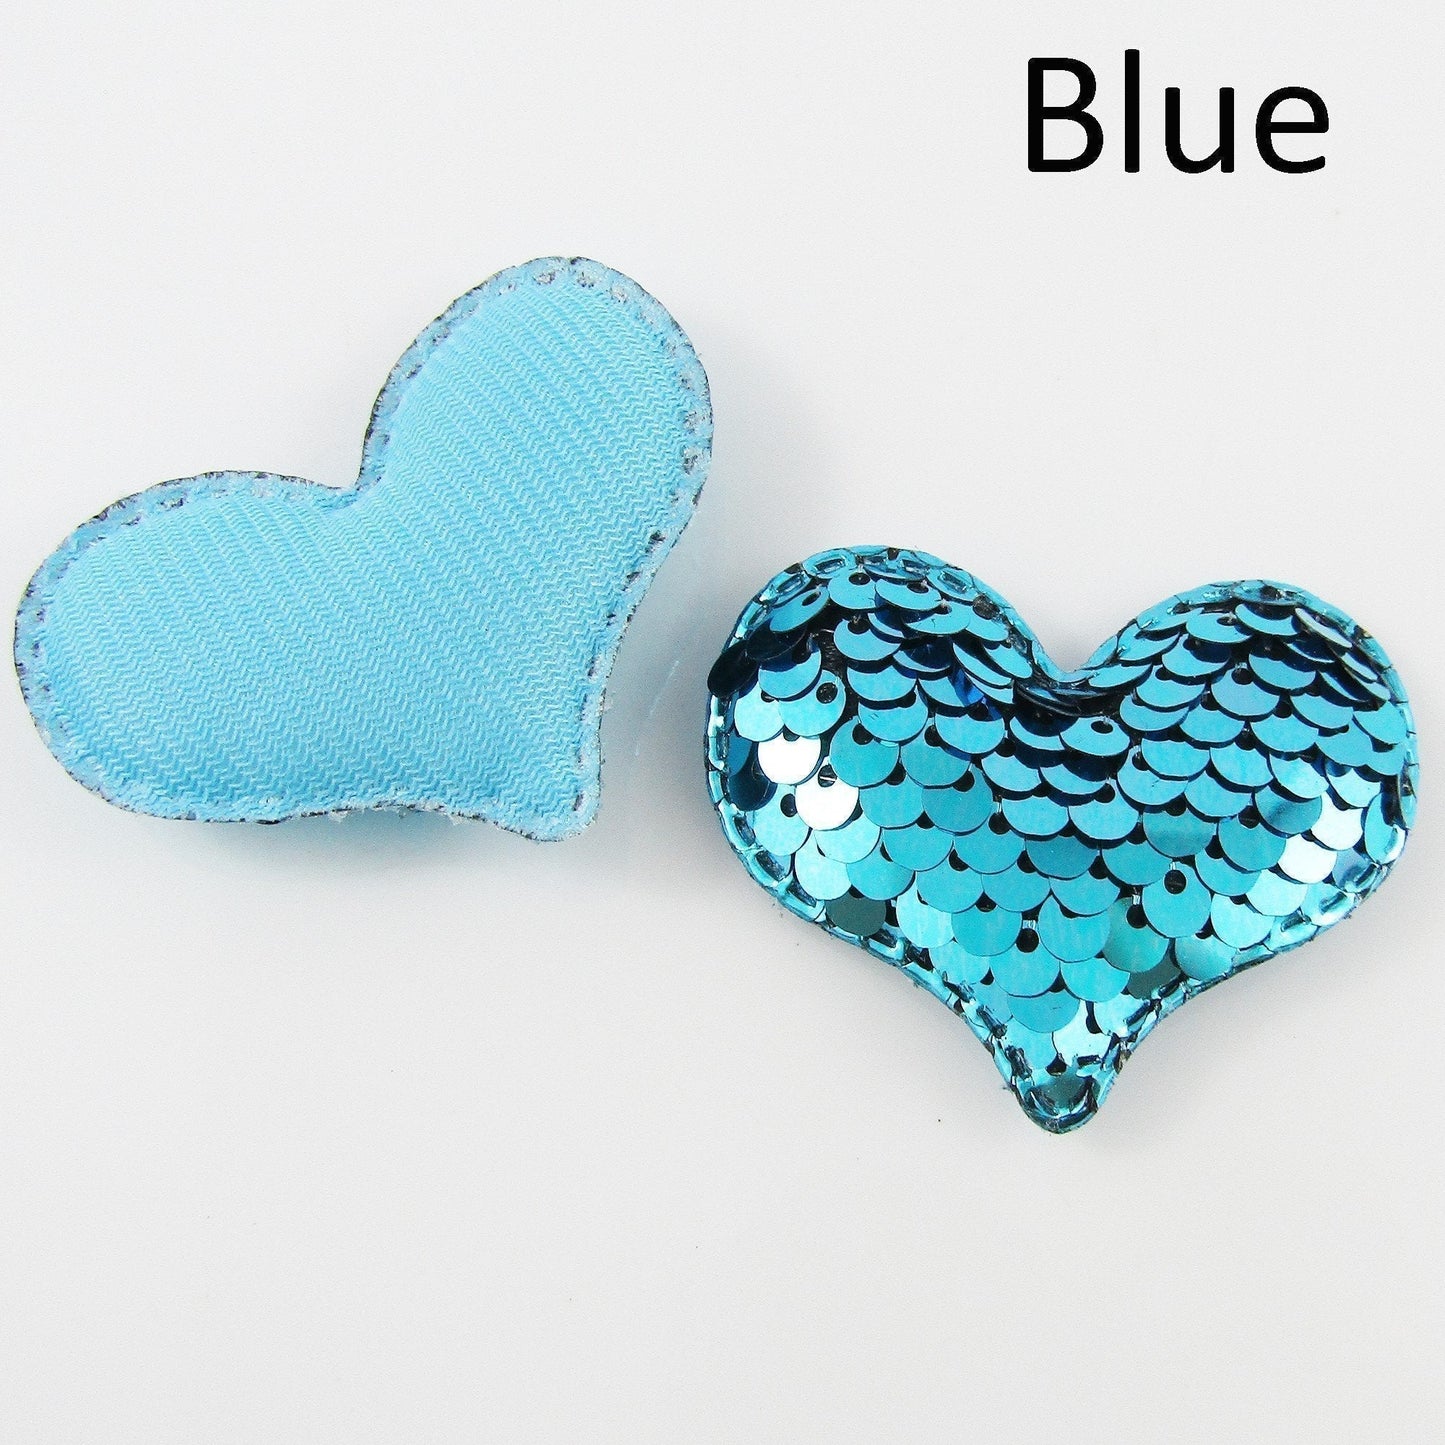 10pcs Sequins Heart Padded Puffy Patch Craft Embellishment 41x54mm Select Colour